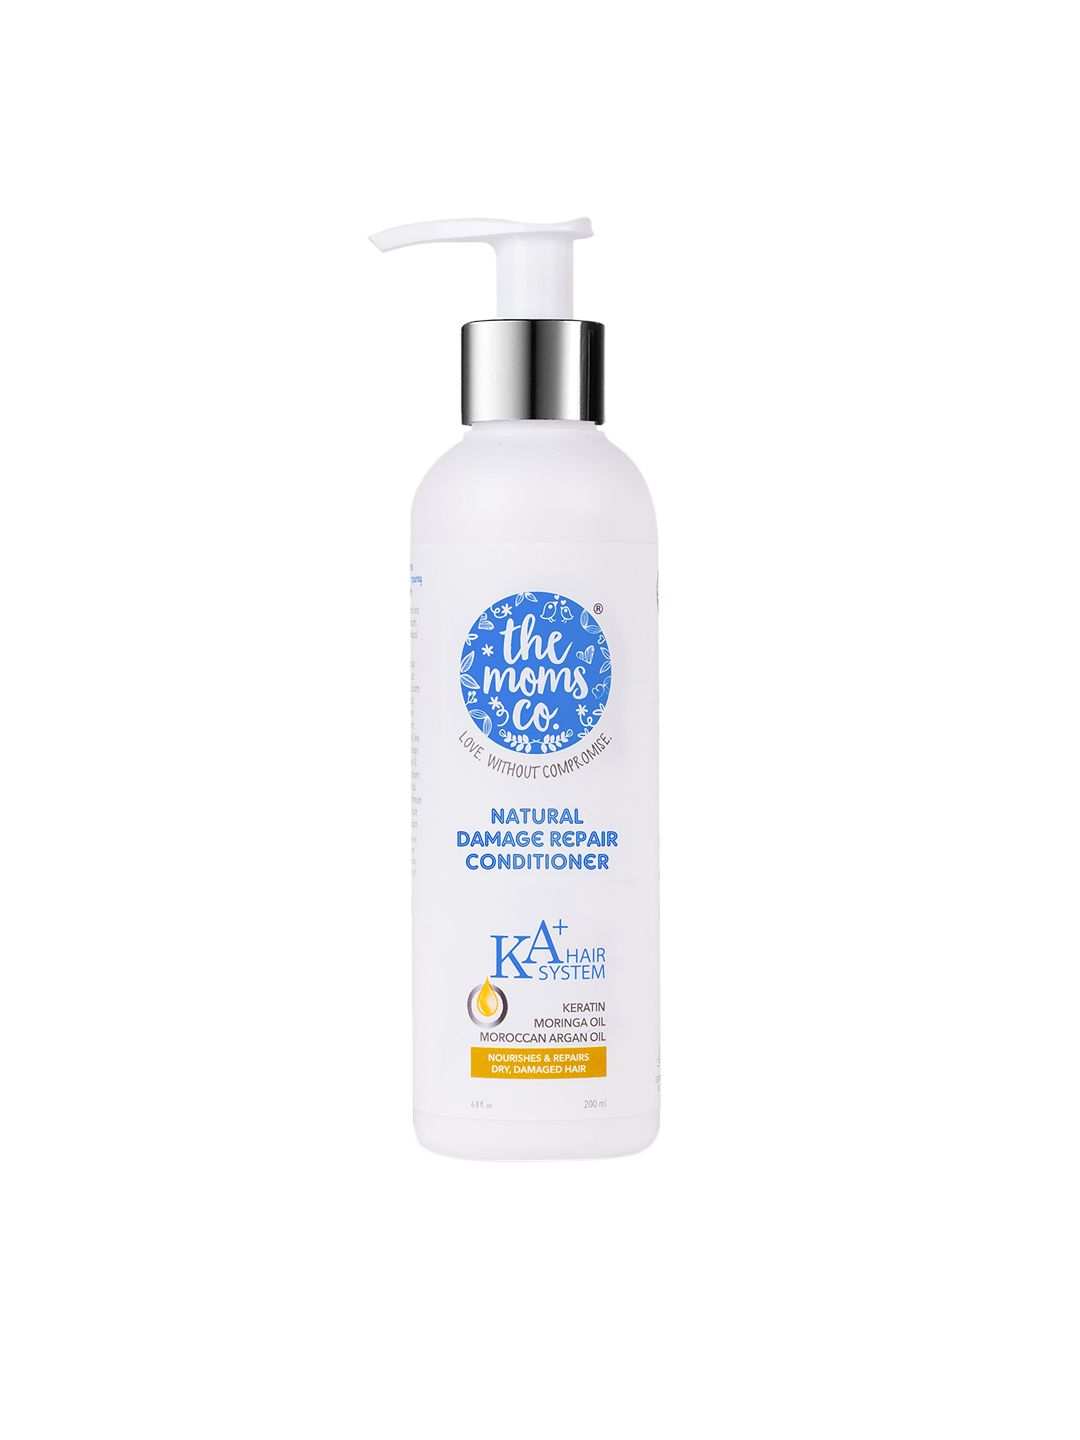 The Moms Co. Natural Damage Repair Hair Conditioner with Keratin - 200 ml Price in India